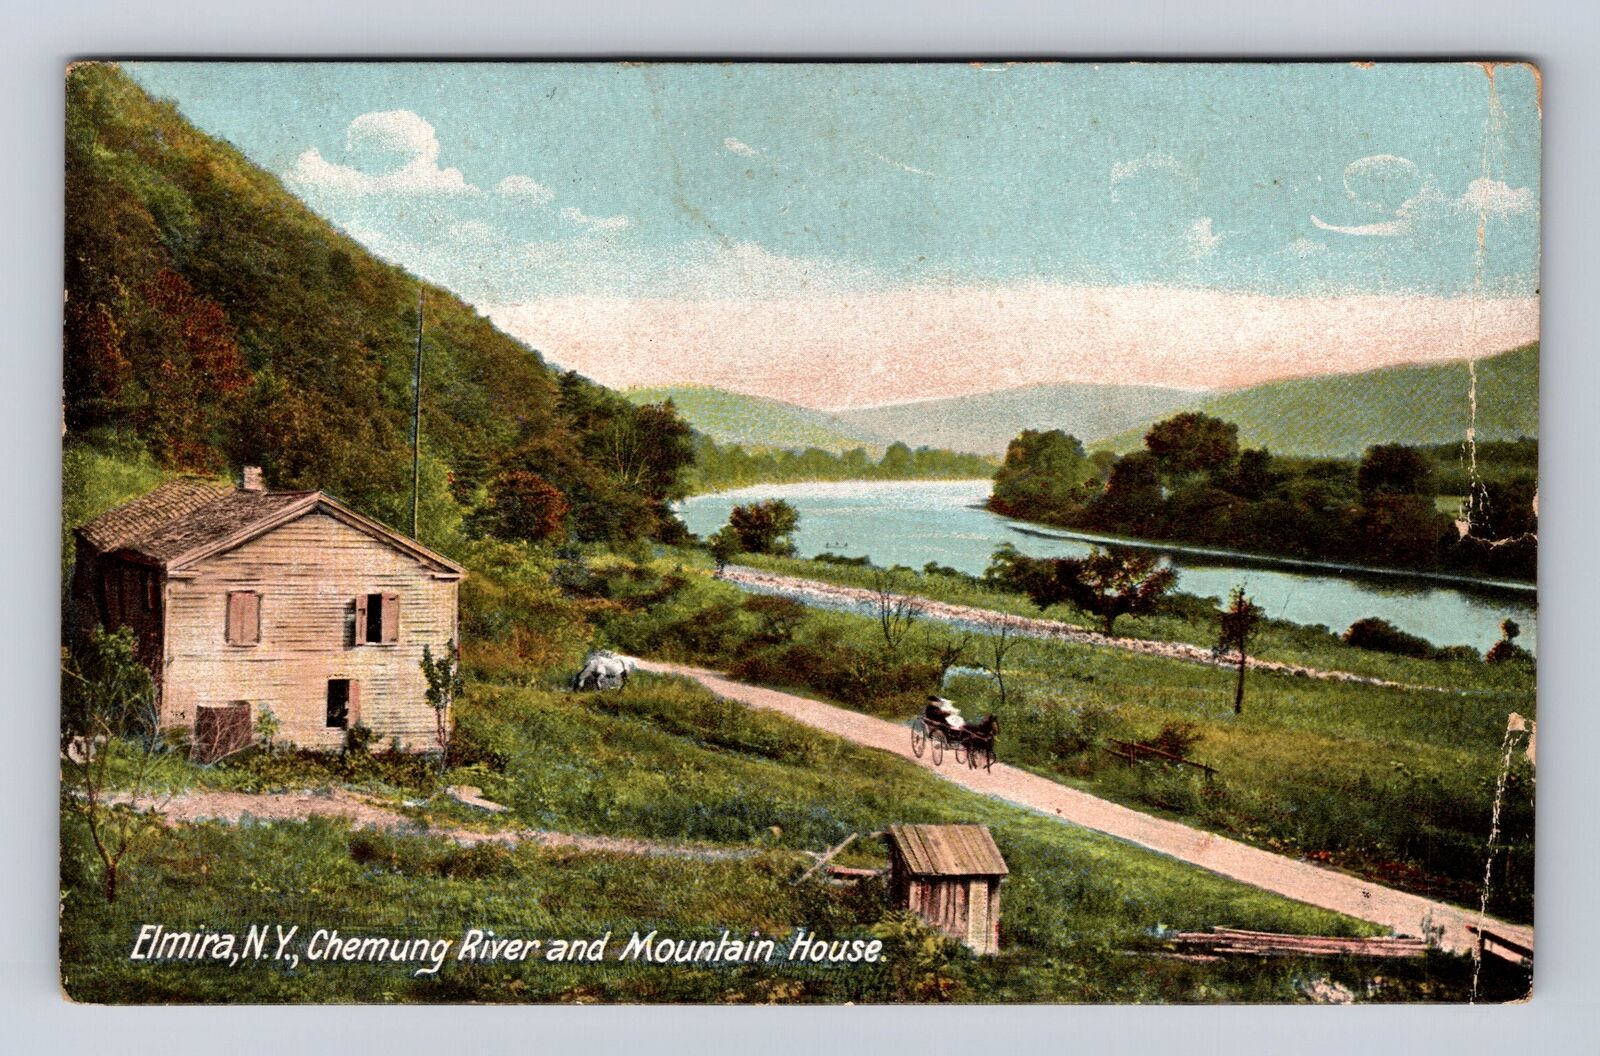 Elmira NY- New York, Chemung River And Mountain House, Vintage c1911 Postcard